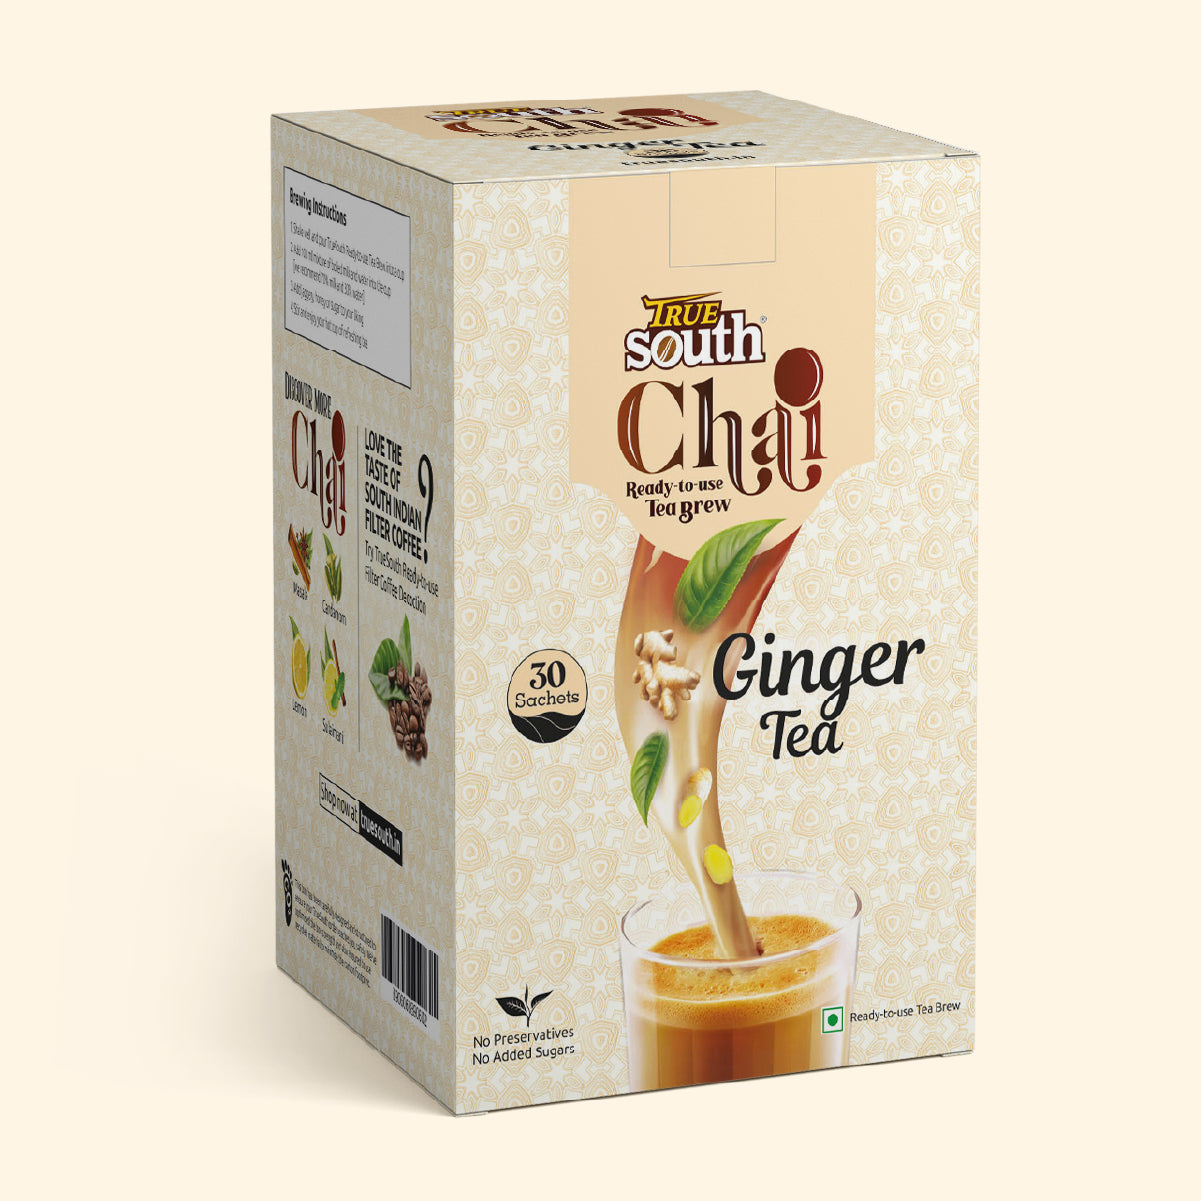 GINGER Ready-to-Use Tea Brew